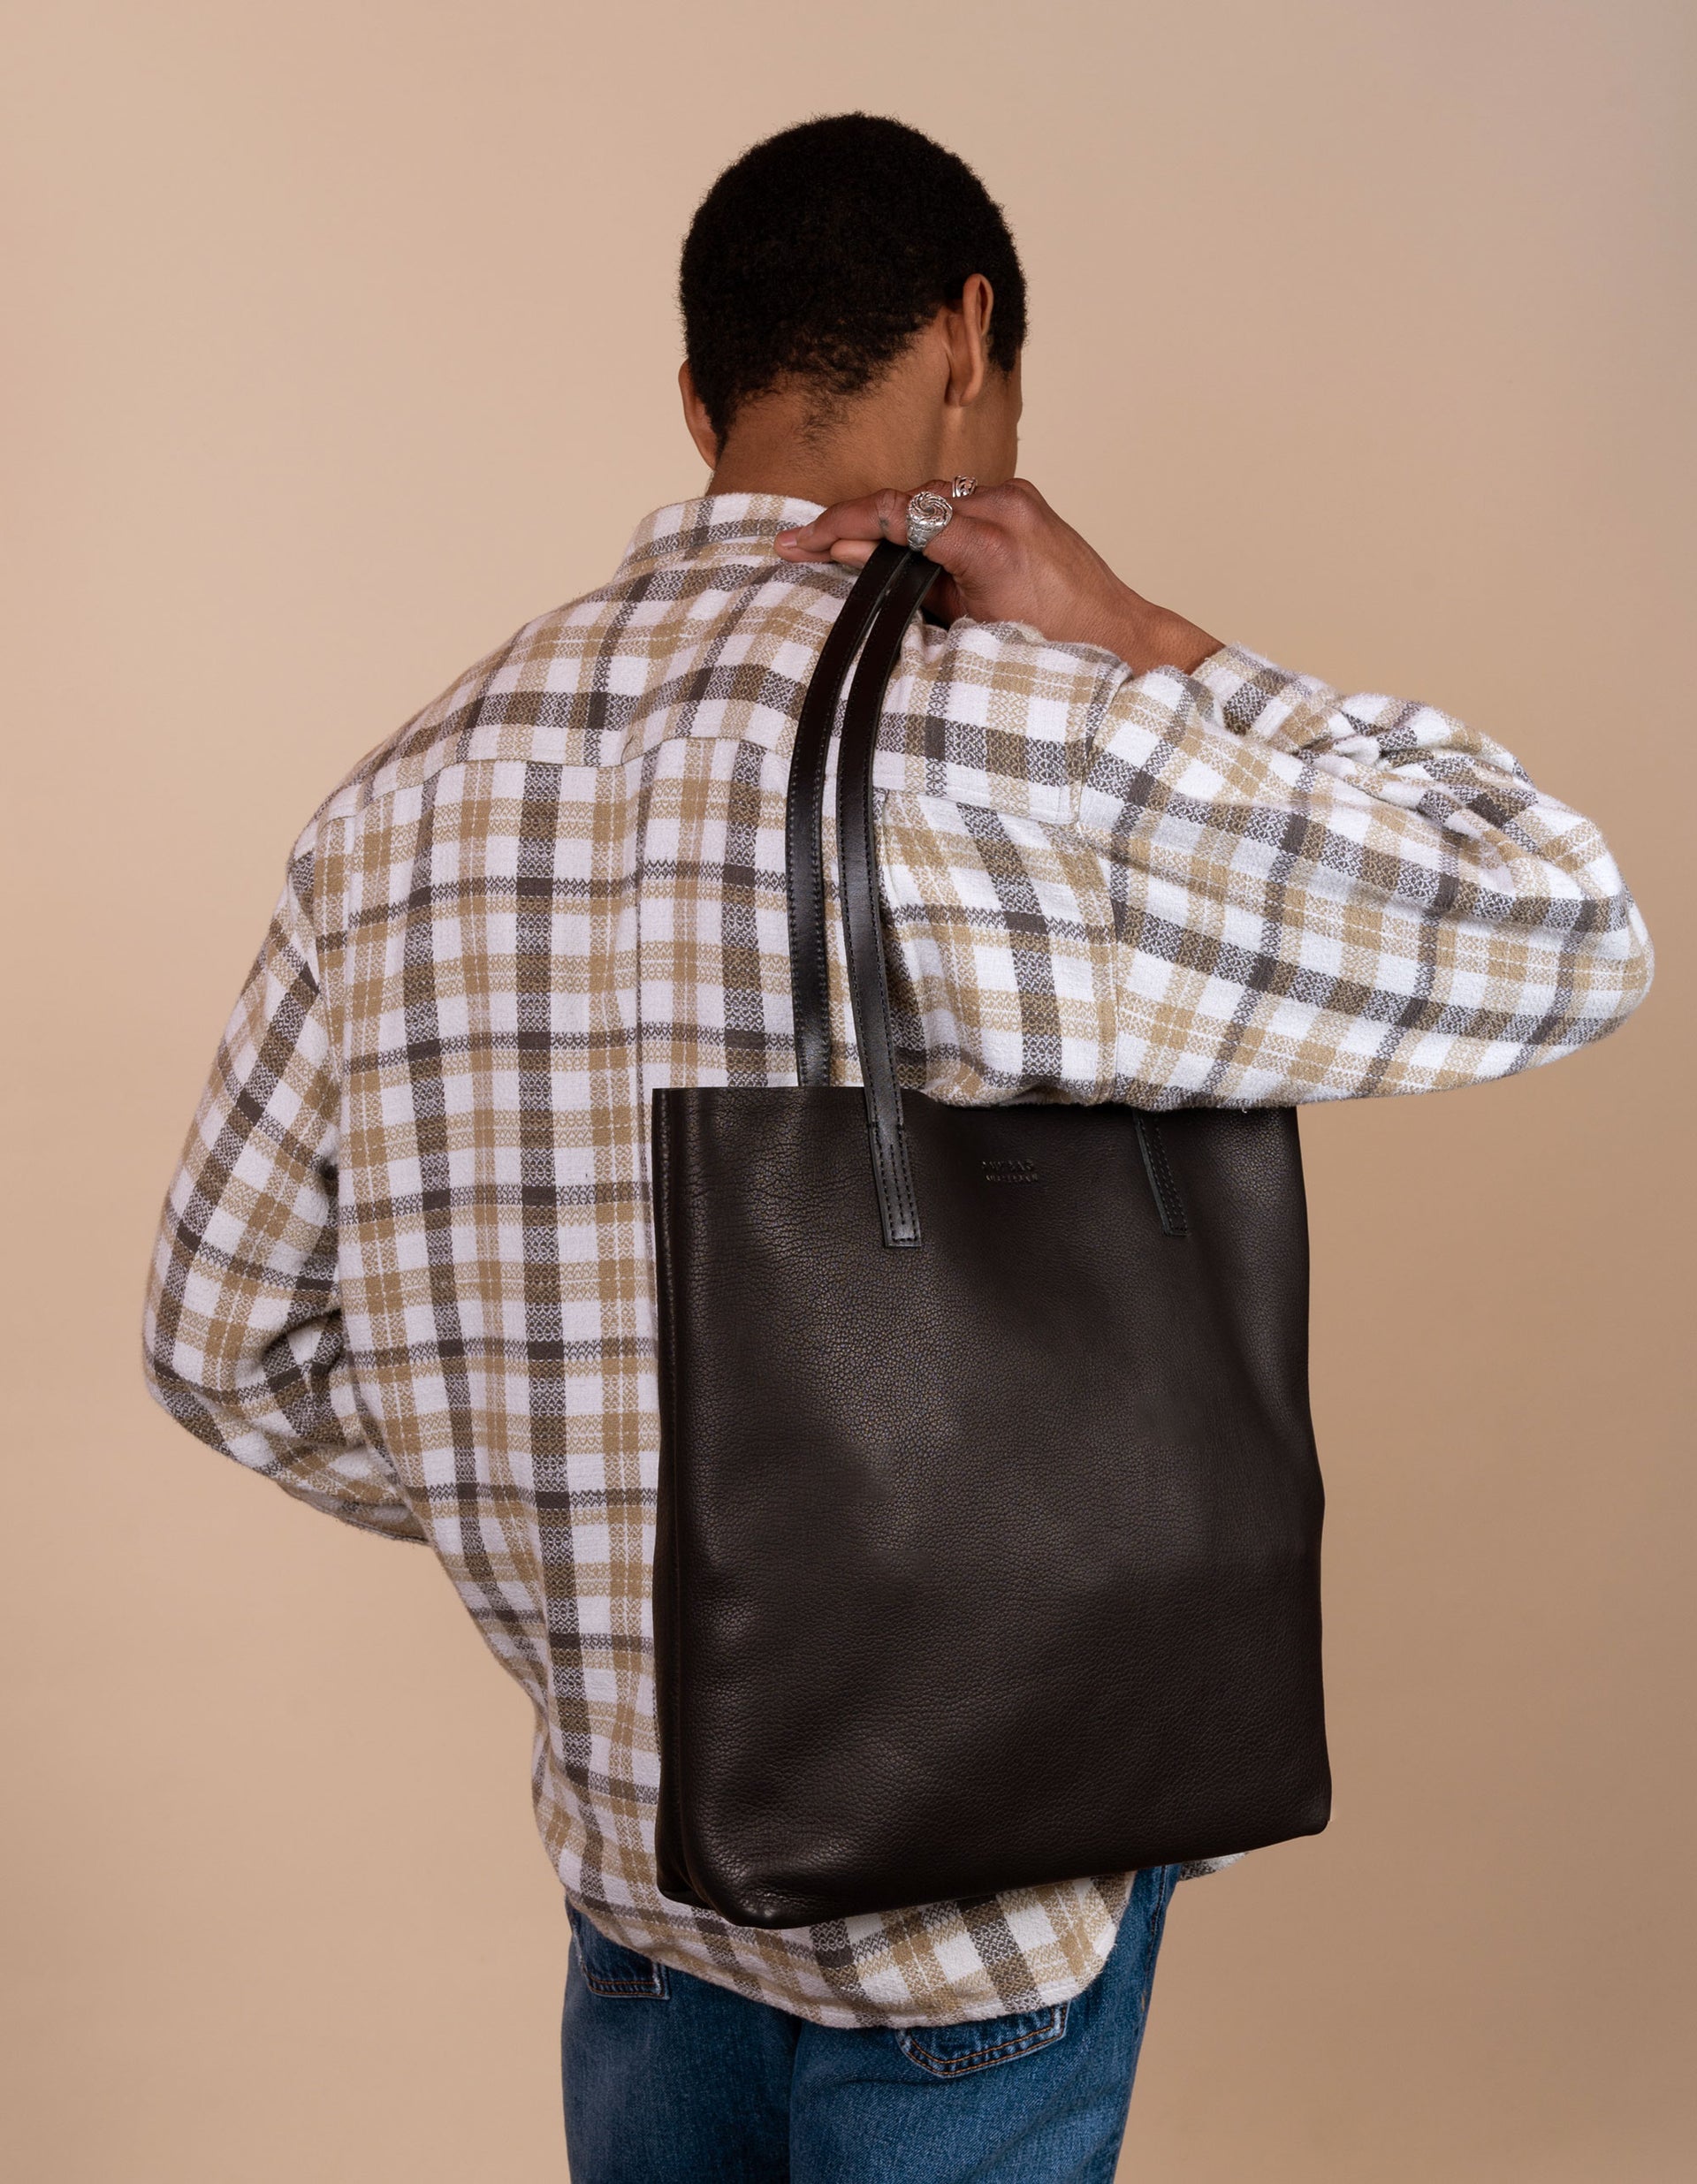 Georgia tote in black soft grain leather - male model product image - image from the back